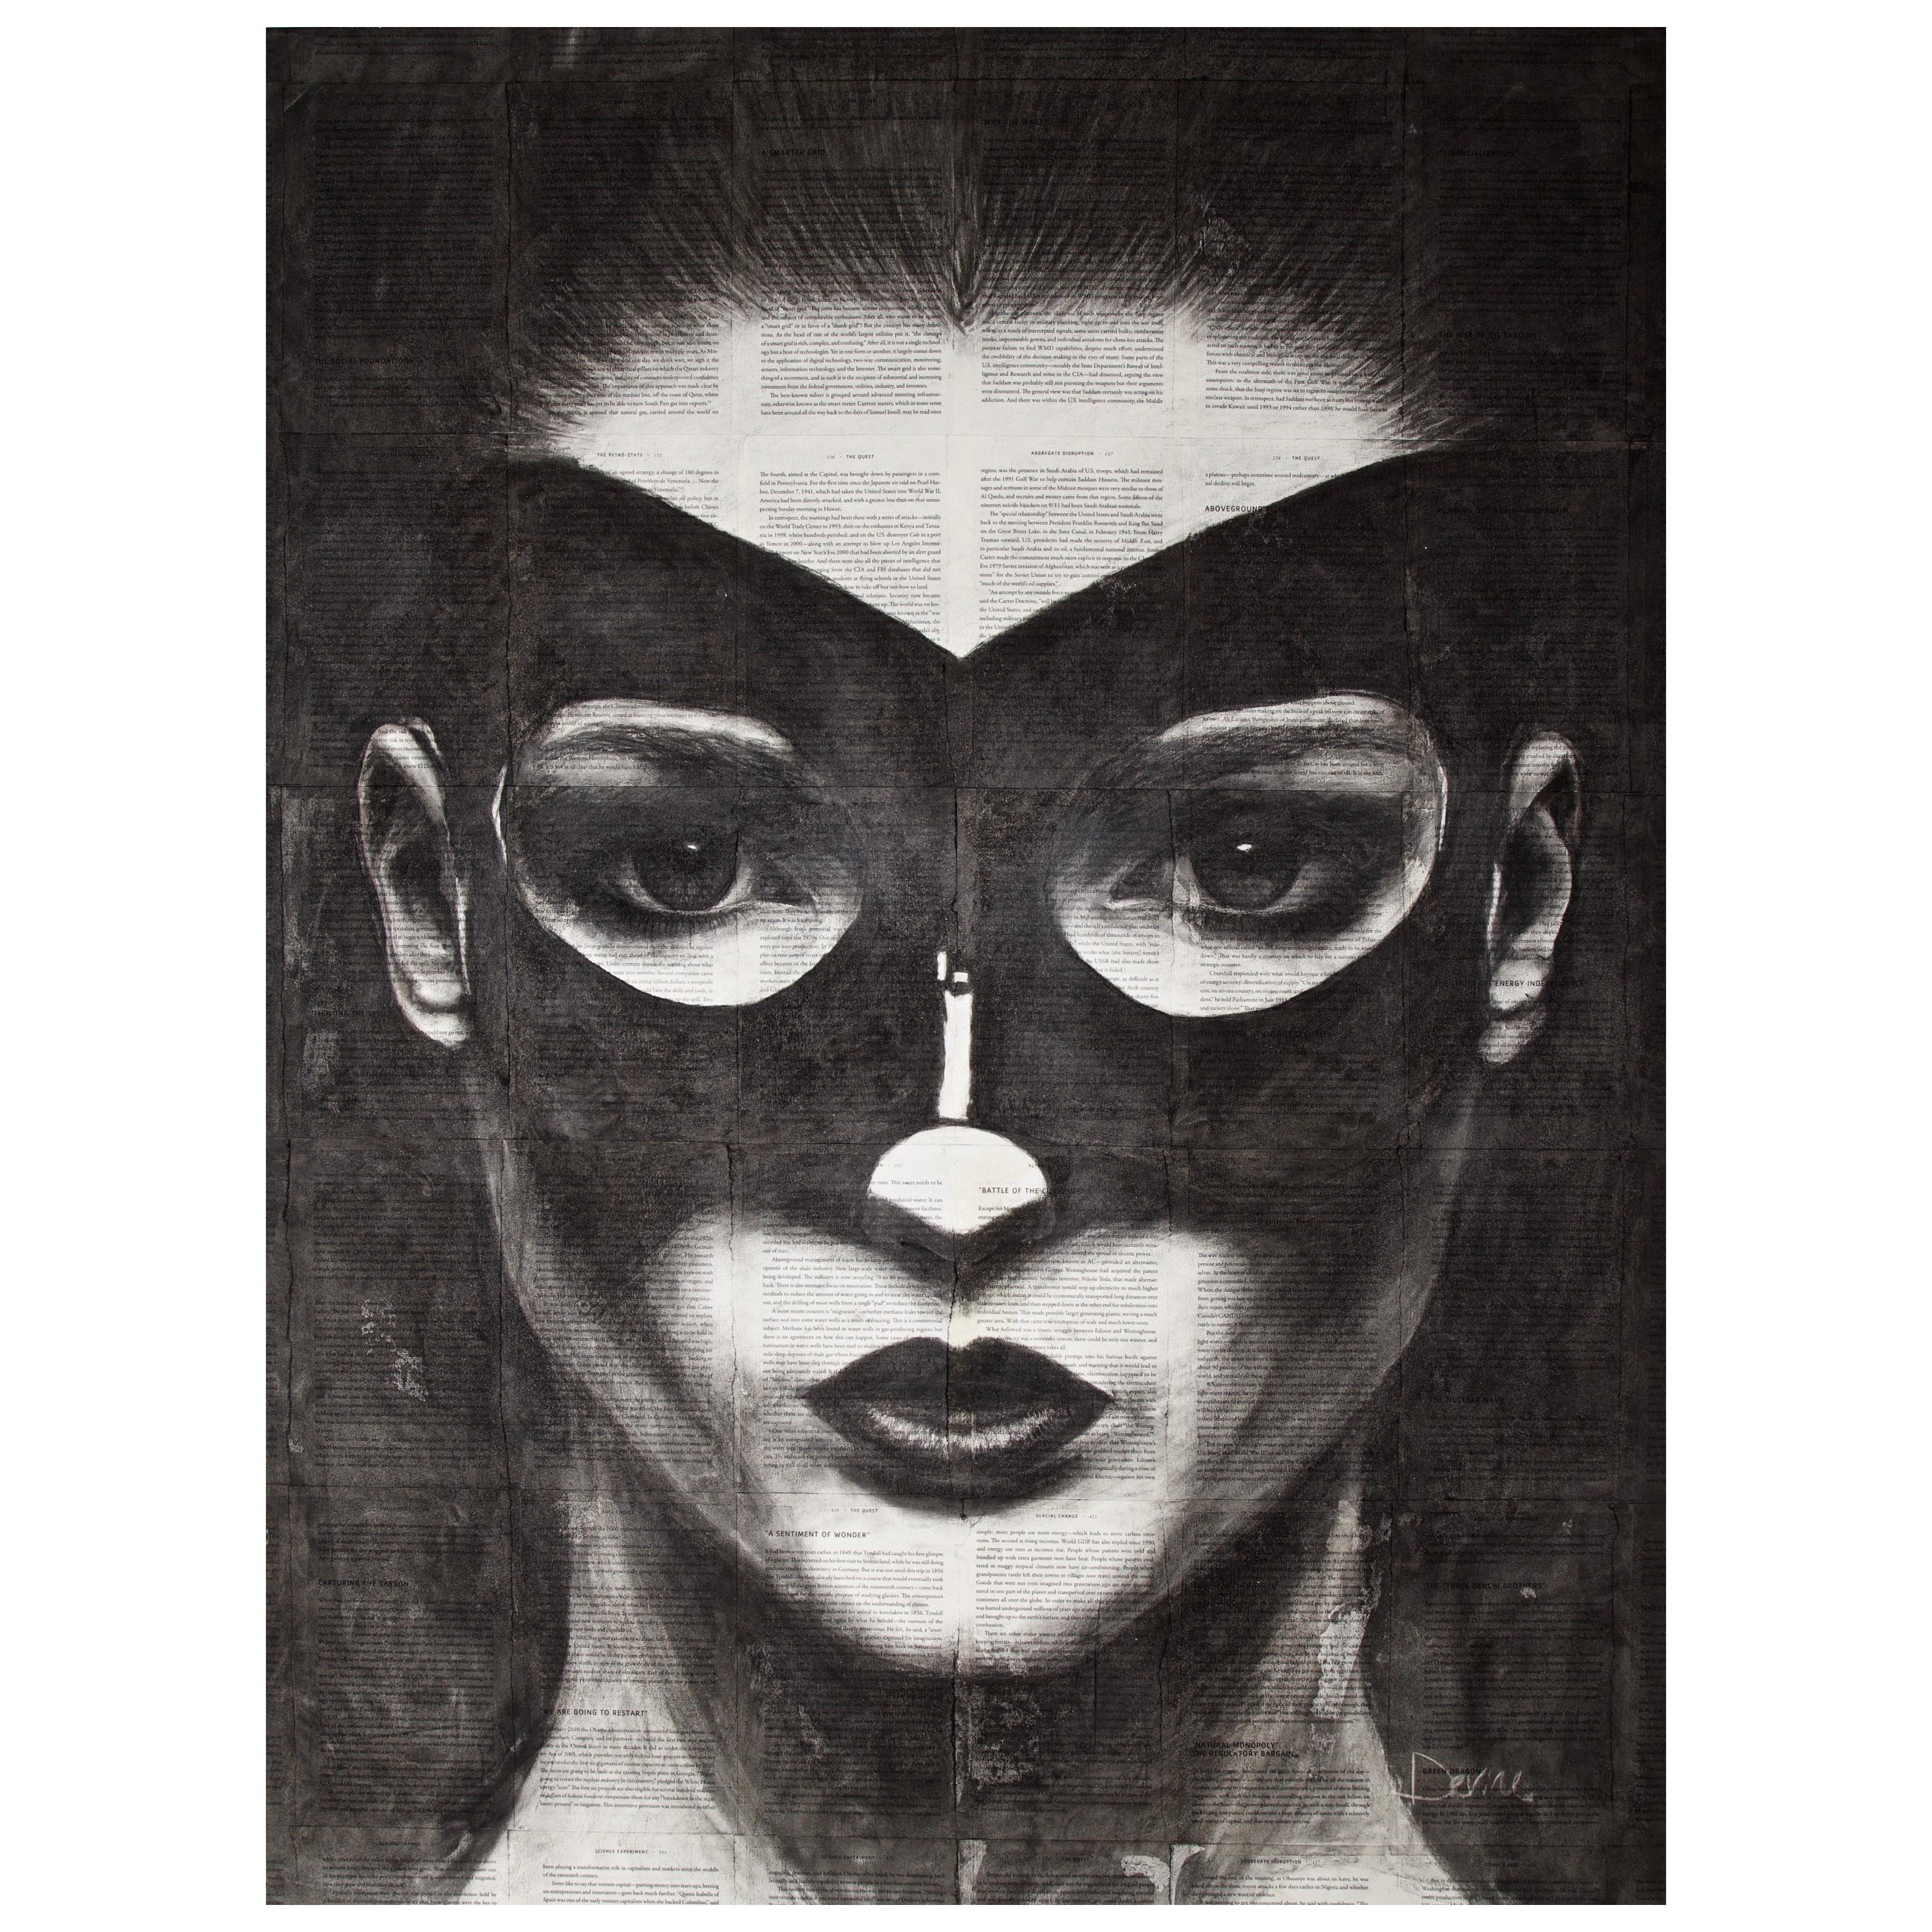 Original Charcoal and Acrylic Media by Kelly Devine, Titled Indispensable Power For Sale